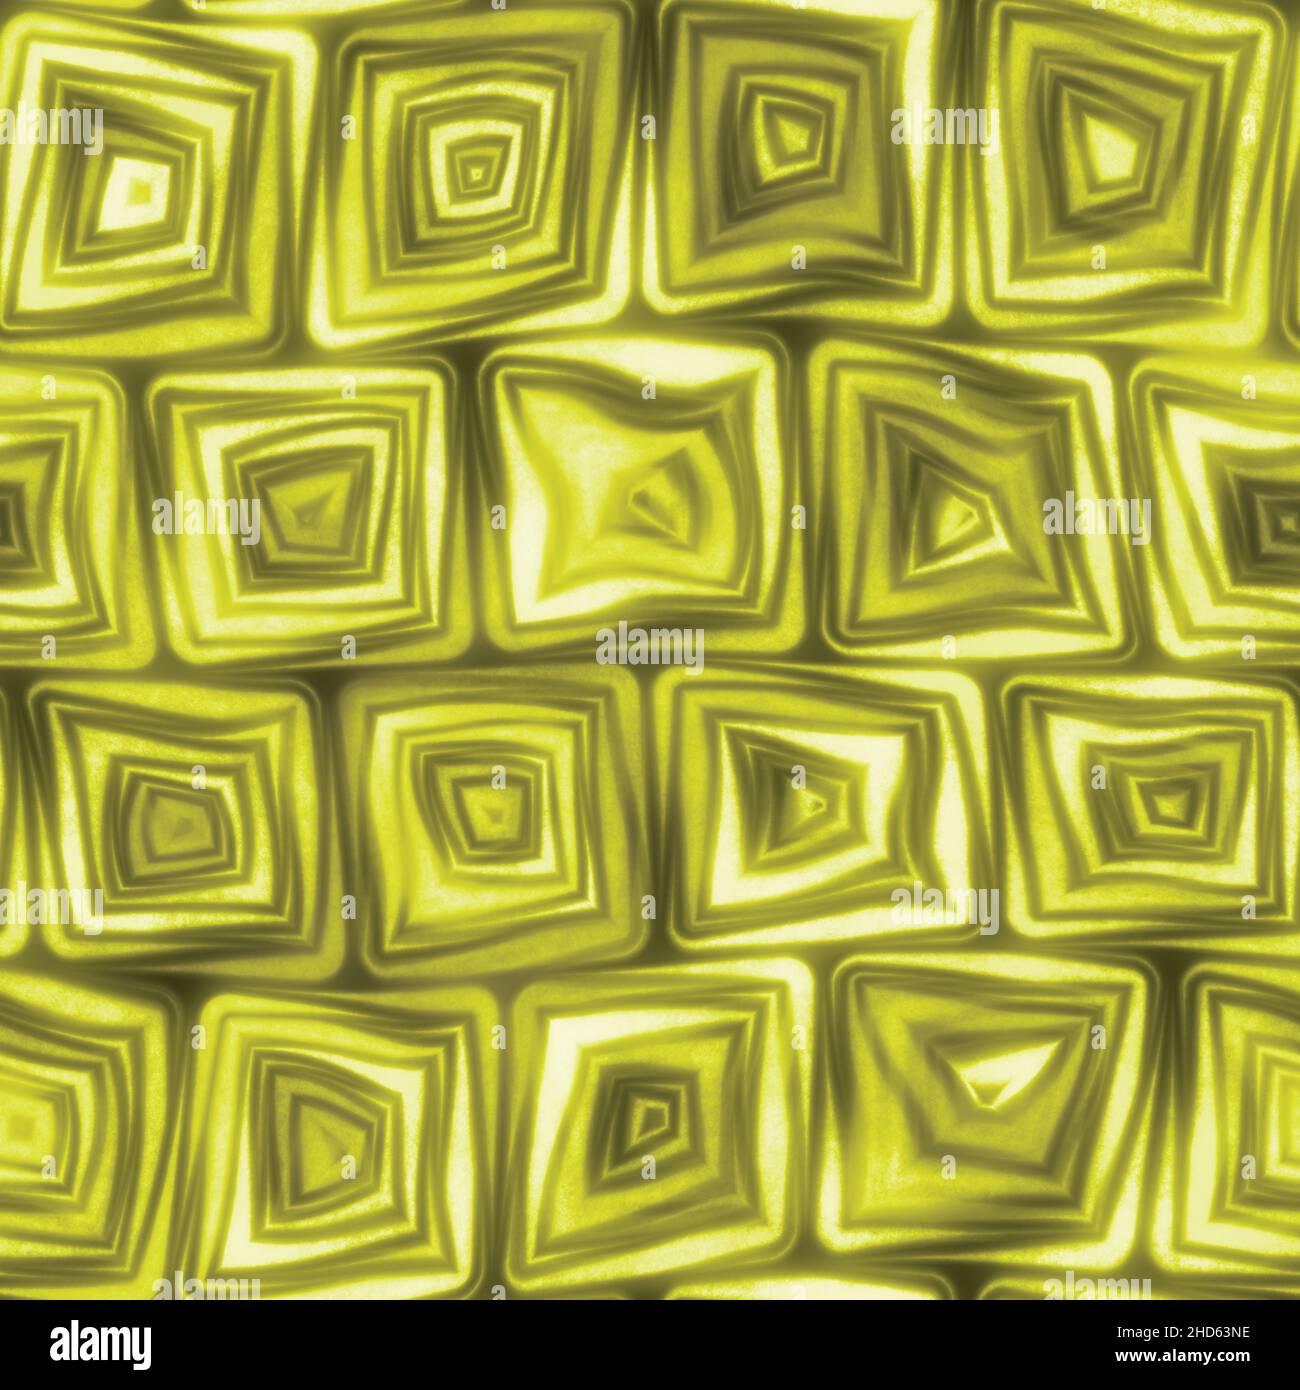 Large Golden Yellow Squiggly Swirly Spiral Squares Seamless Texture Pattern Stock Photo